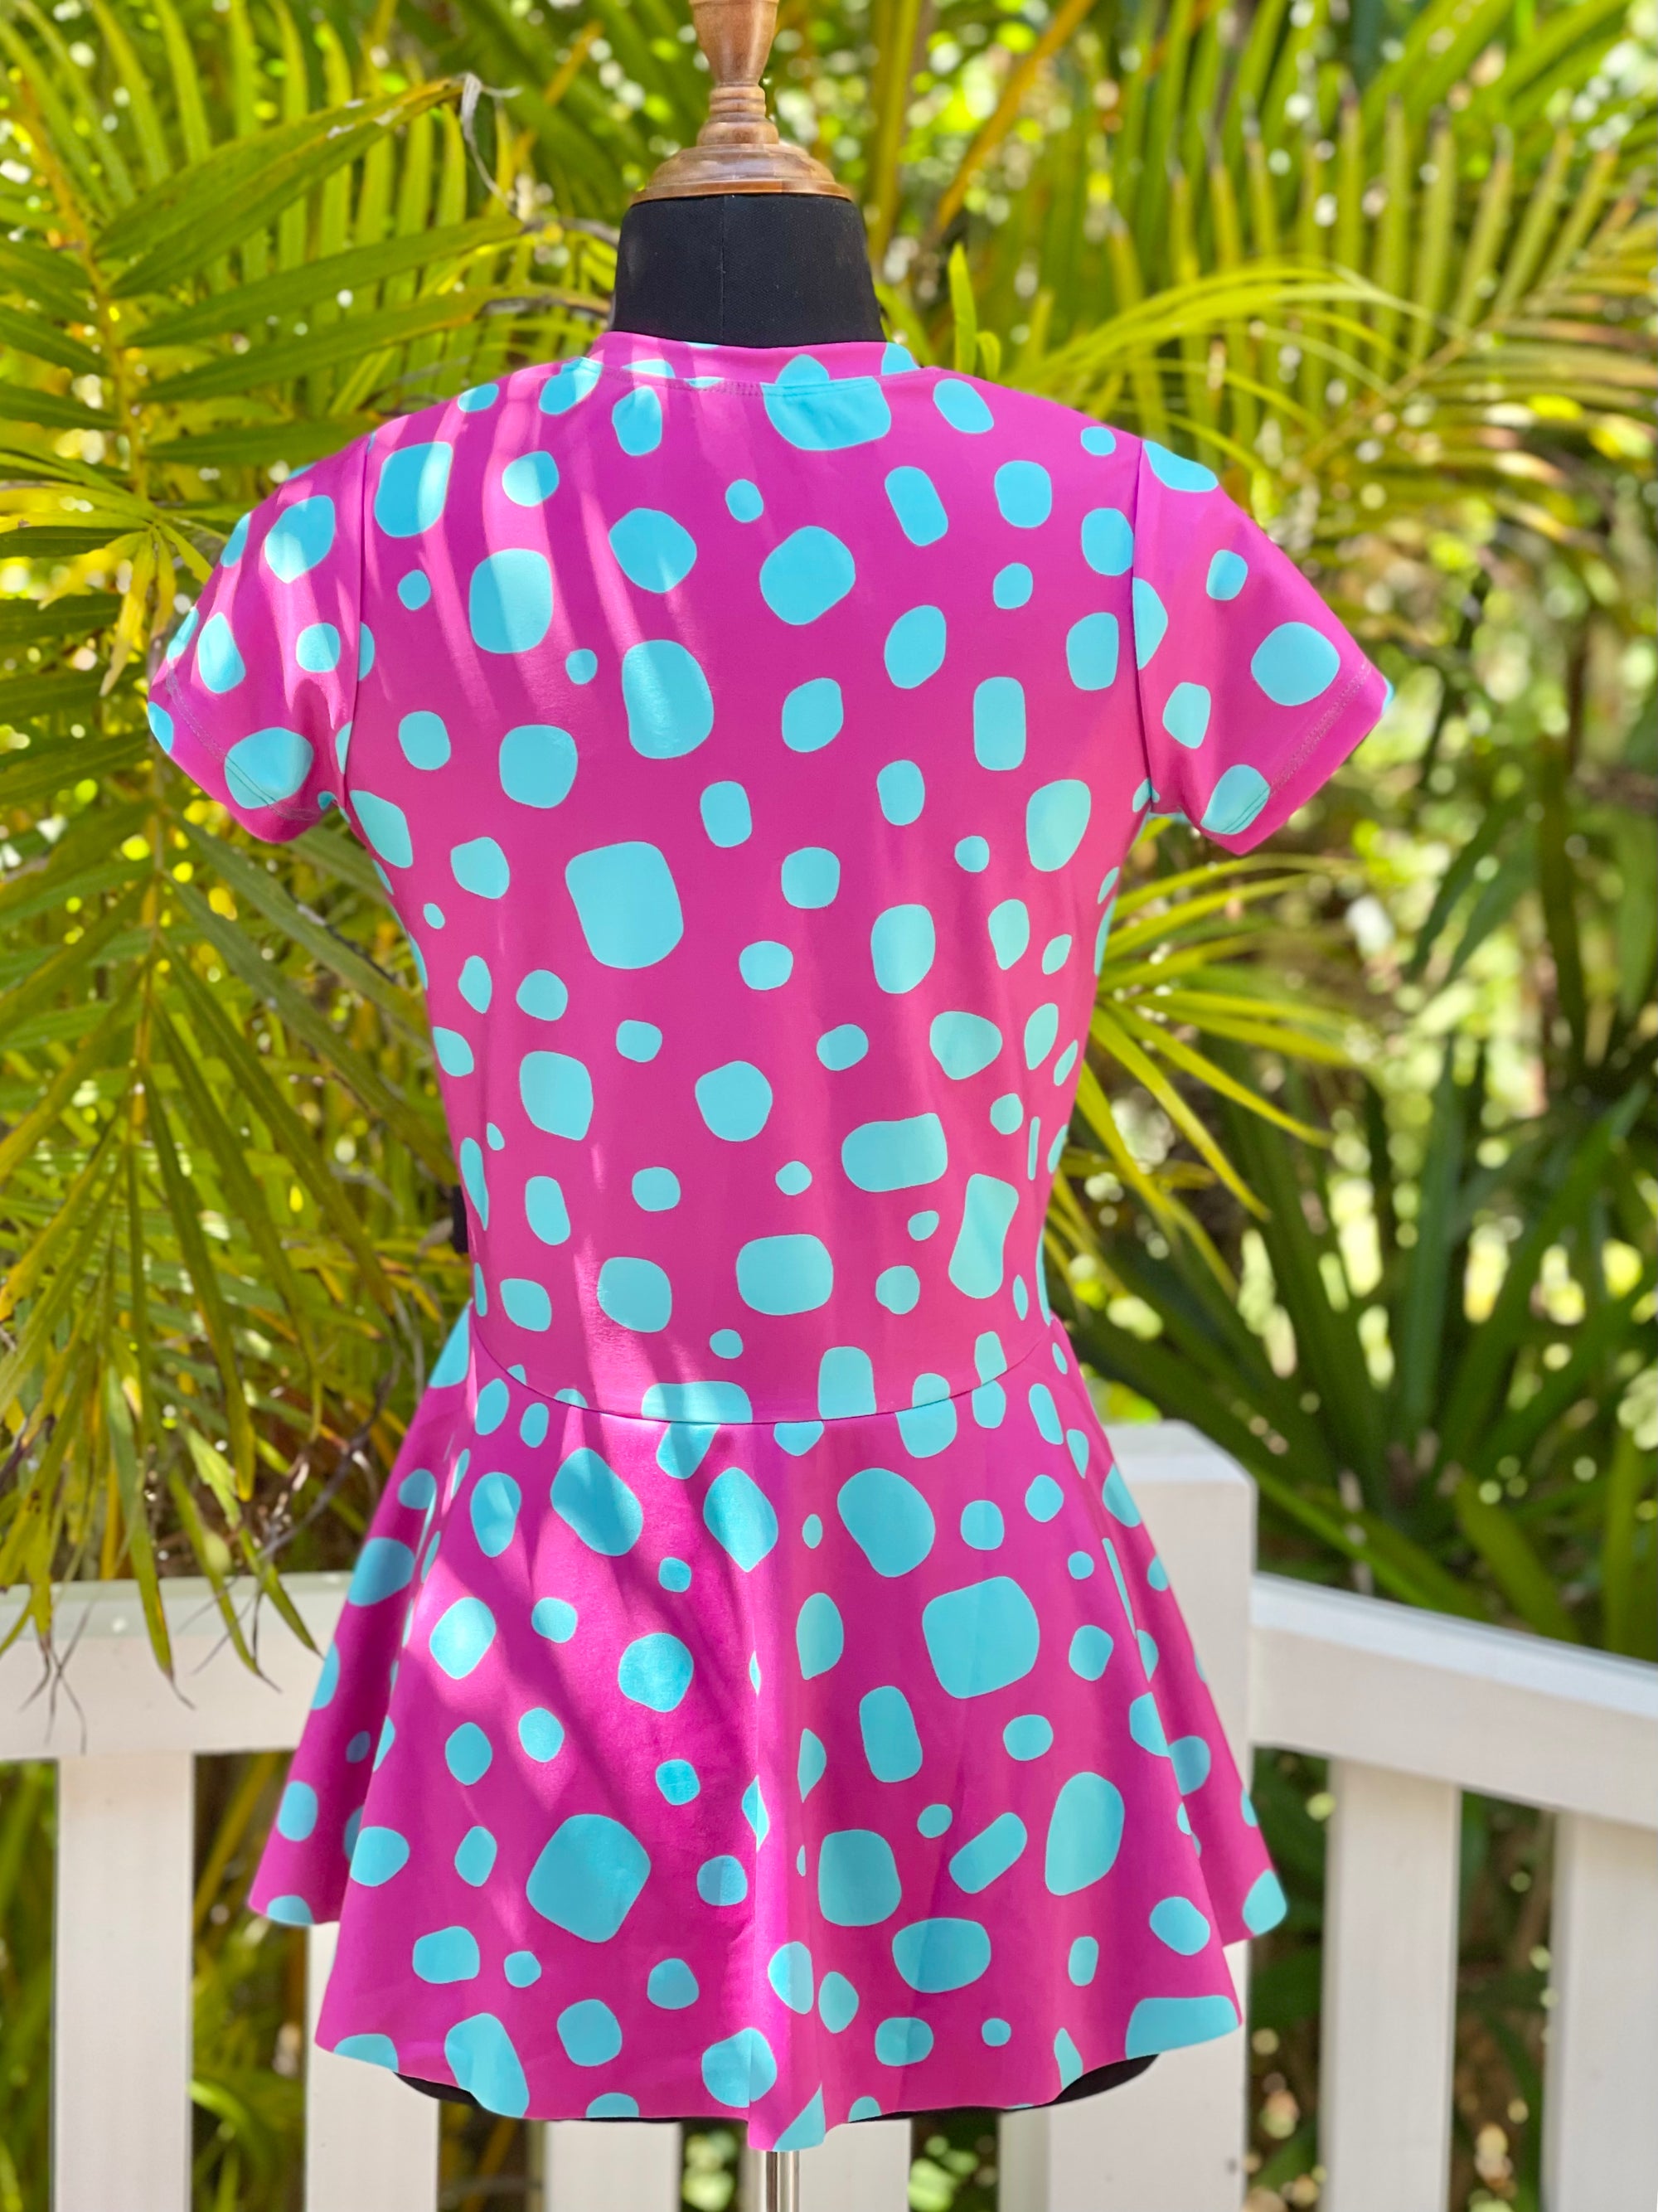 Women's Peplum Rashie- Magenta and Teal Pebbles - One only size M